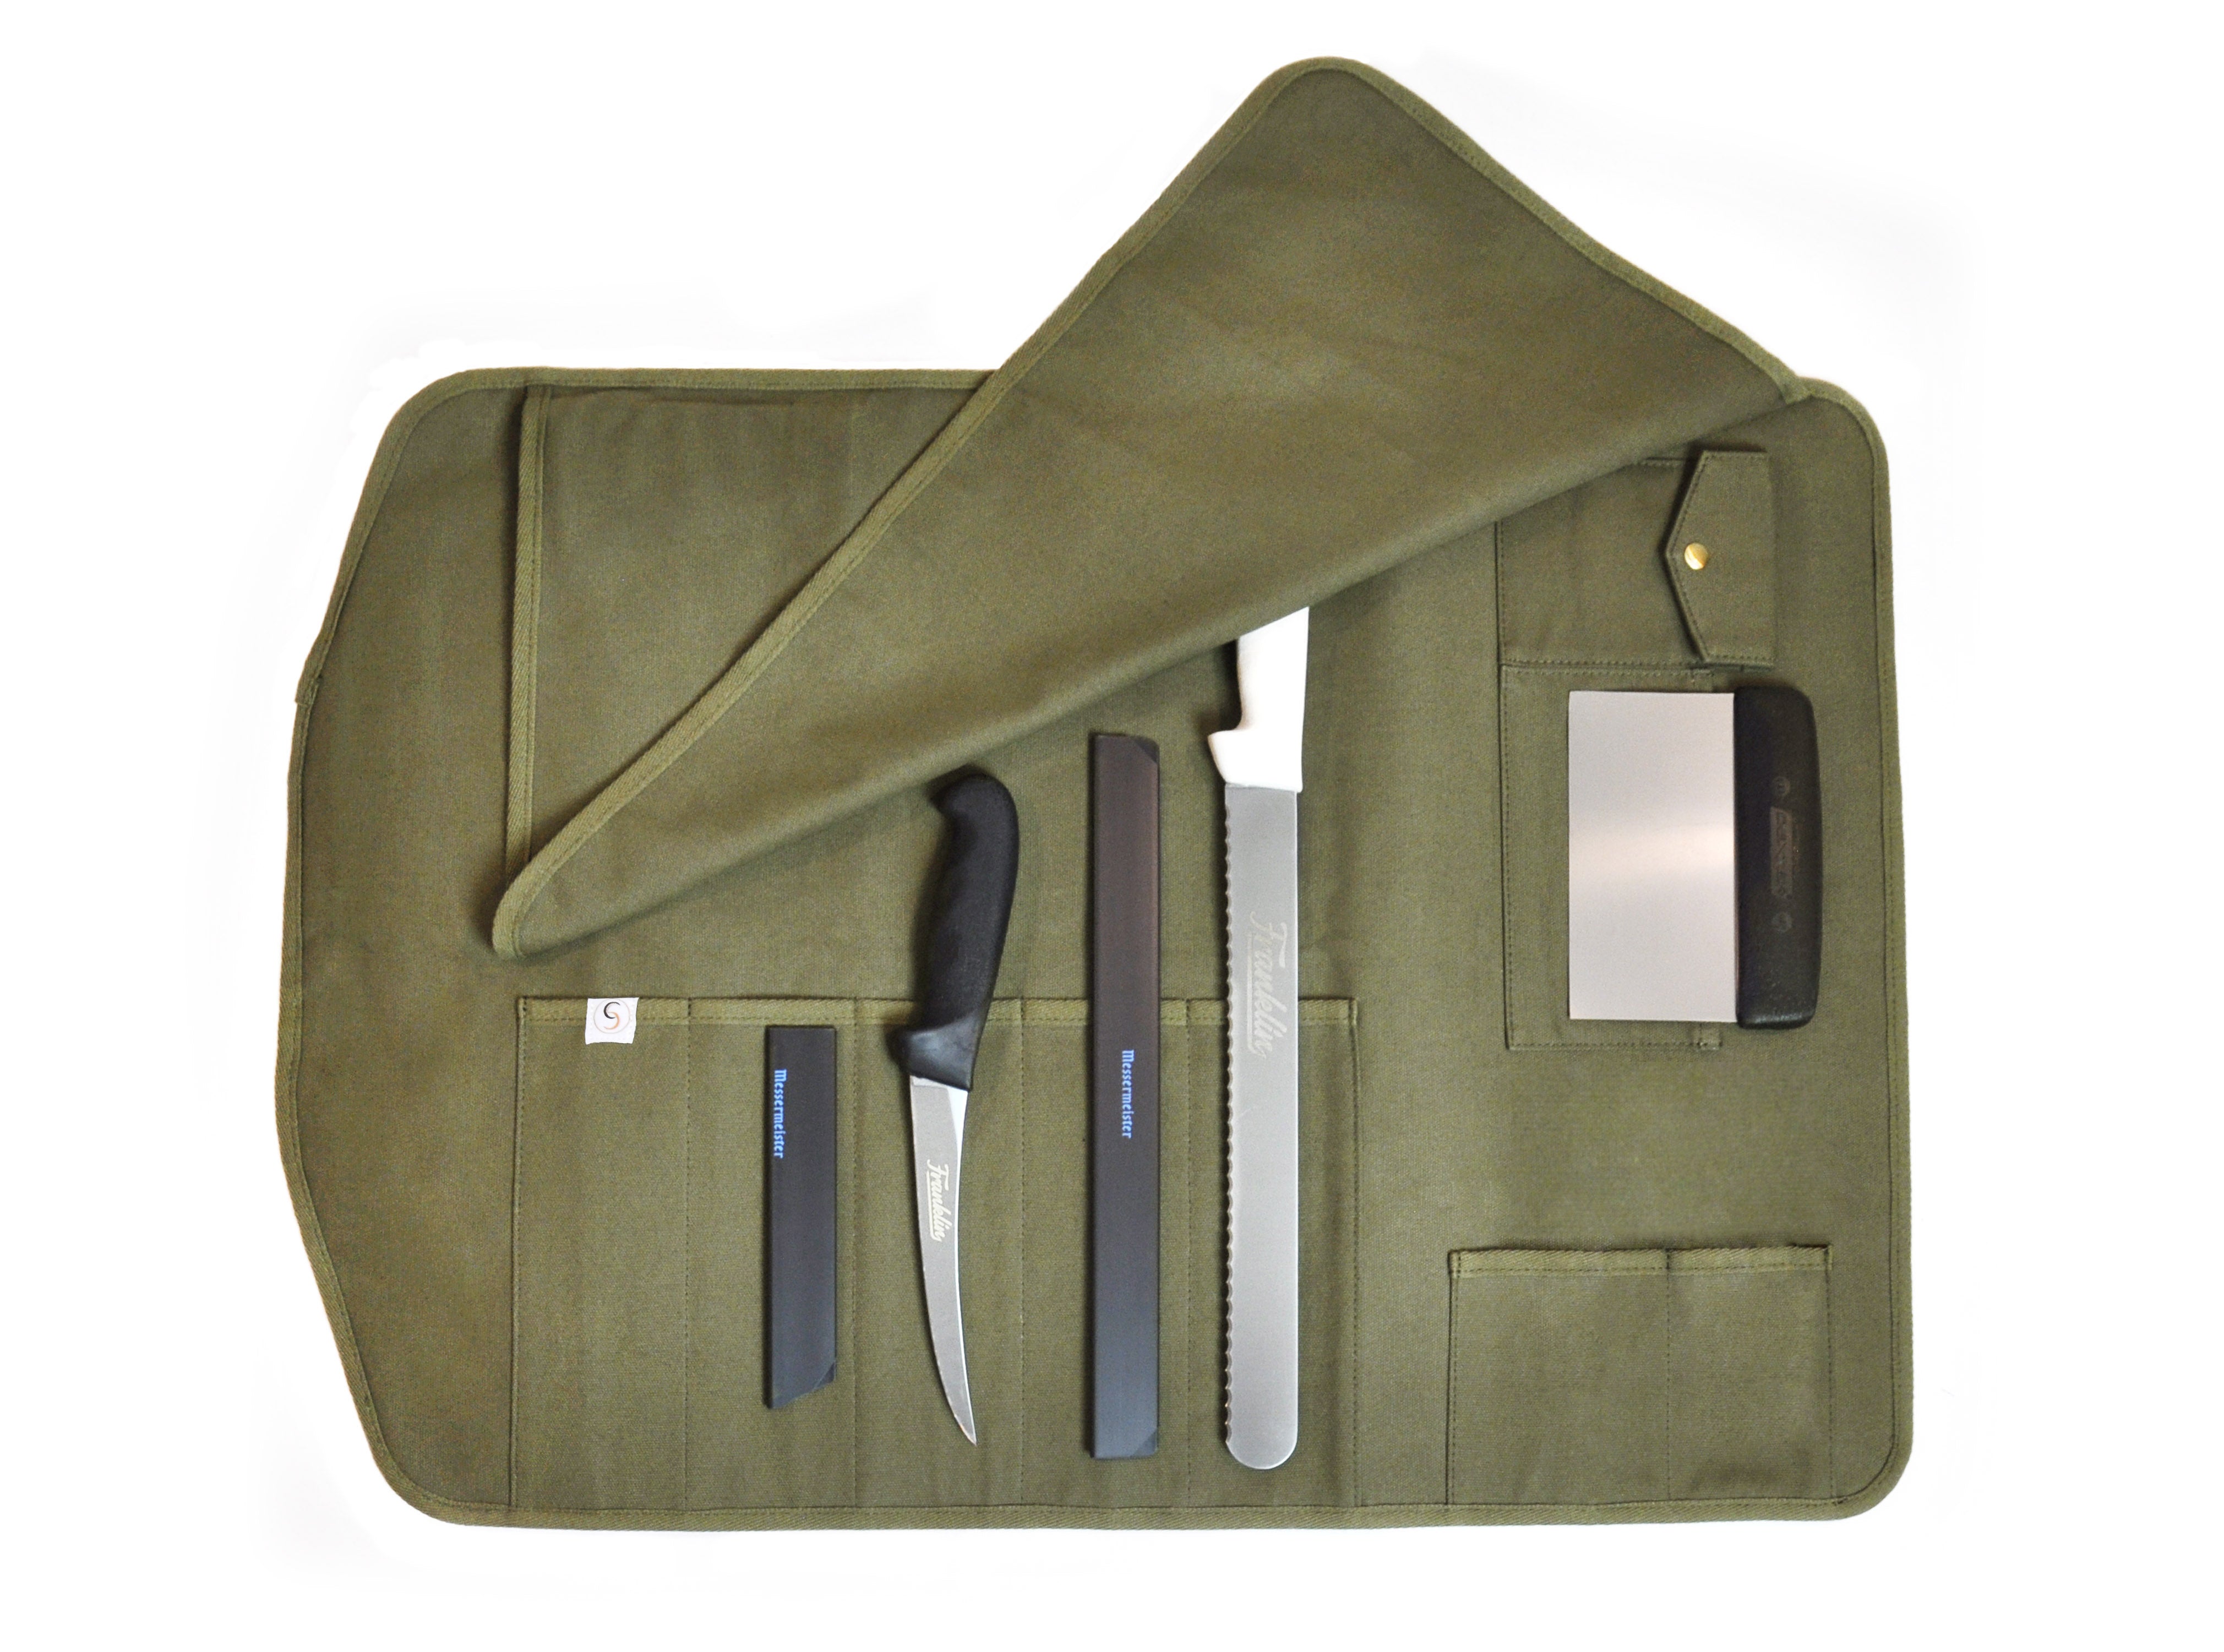 Interior of Green Franklin Barbecue PIts knife roll to show the various items included in bundle (boning and scalloped knives with their respective guards and dough cutter) and where they fit inside